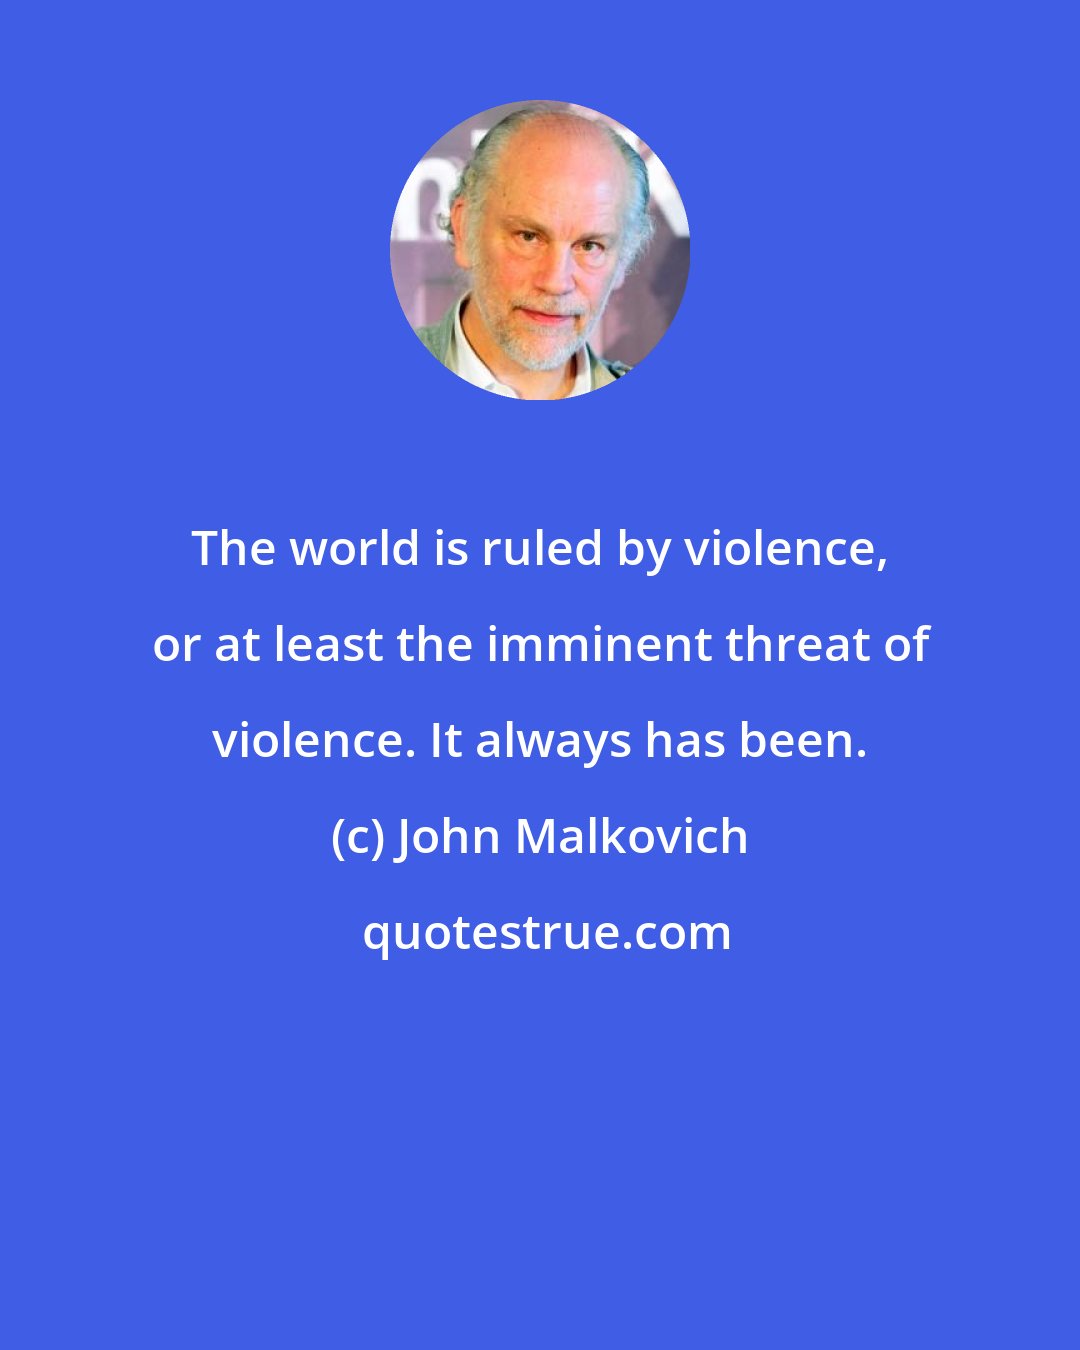 John Malkovich: The world is ruled by violence, or at least the imminent threat of violence. It always has been.